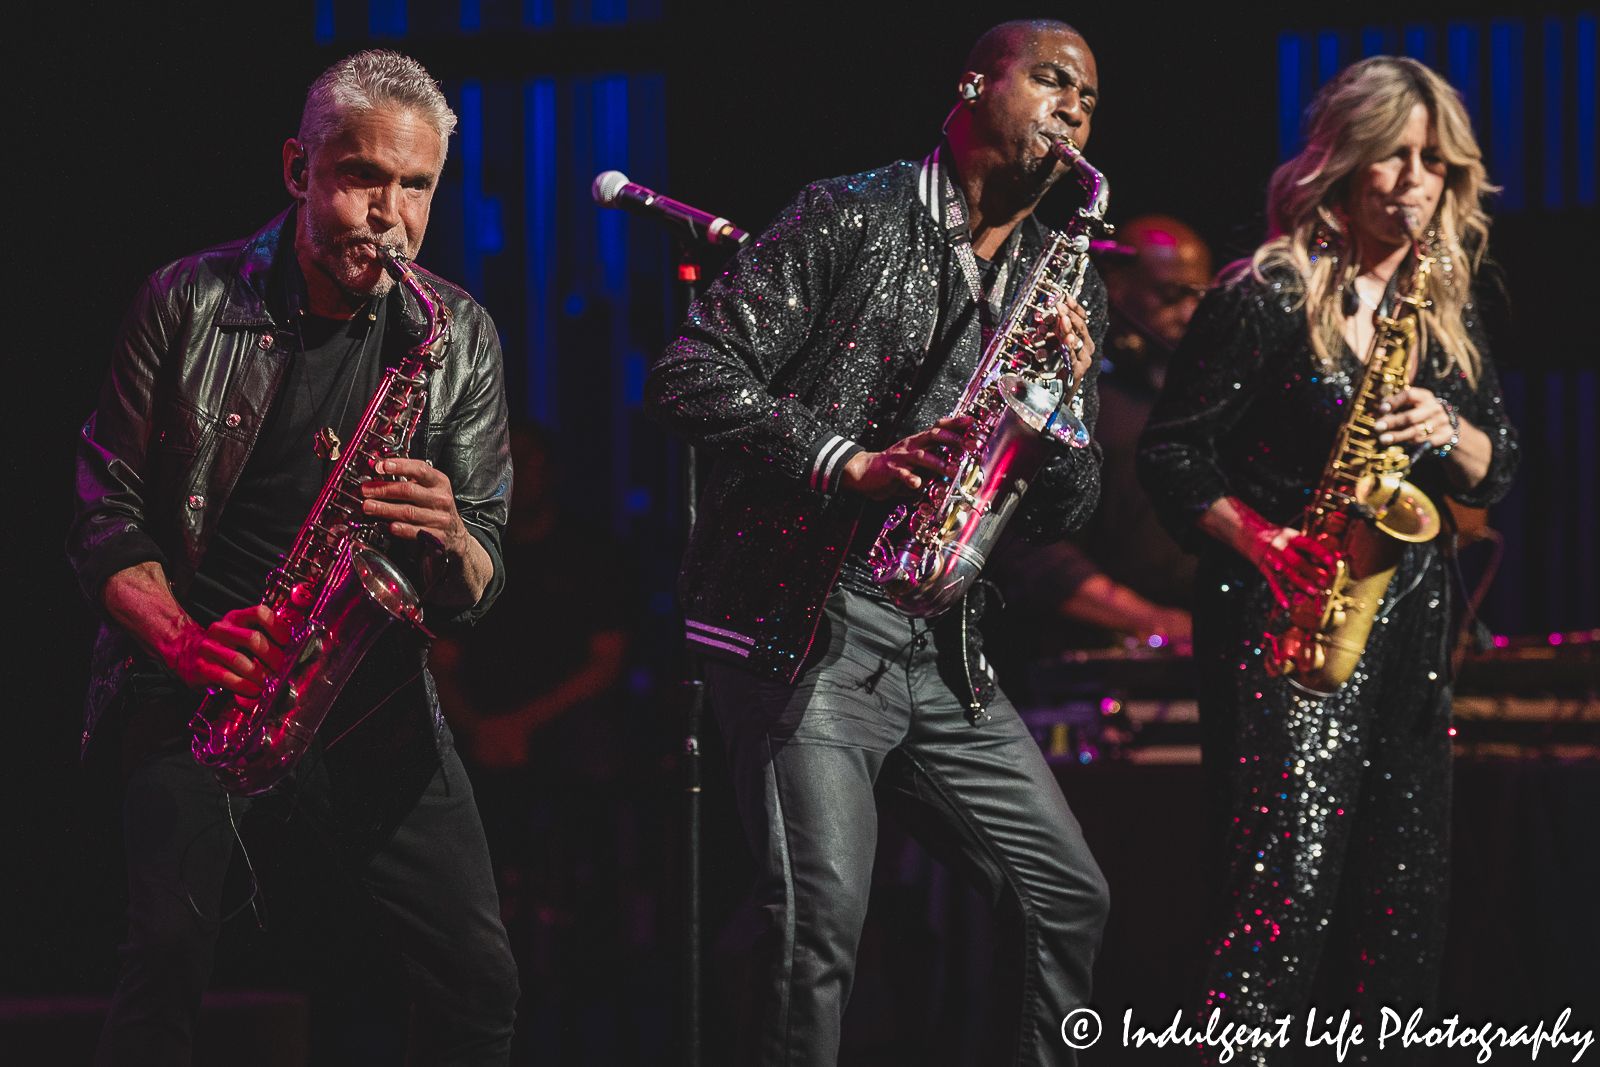 Dave Koz, Eric Darius and Candy Dulfer playing saxophones together live at Kauffman Center for the Performing Arts in downtown Kansas City, MO on July 15, 2023.